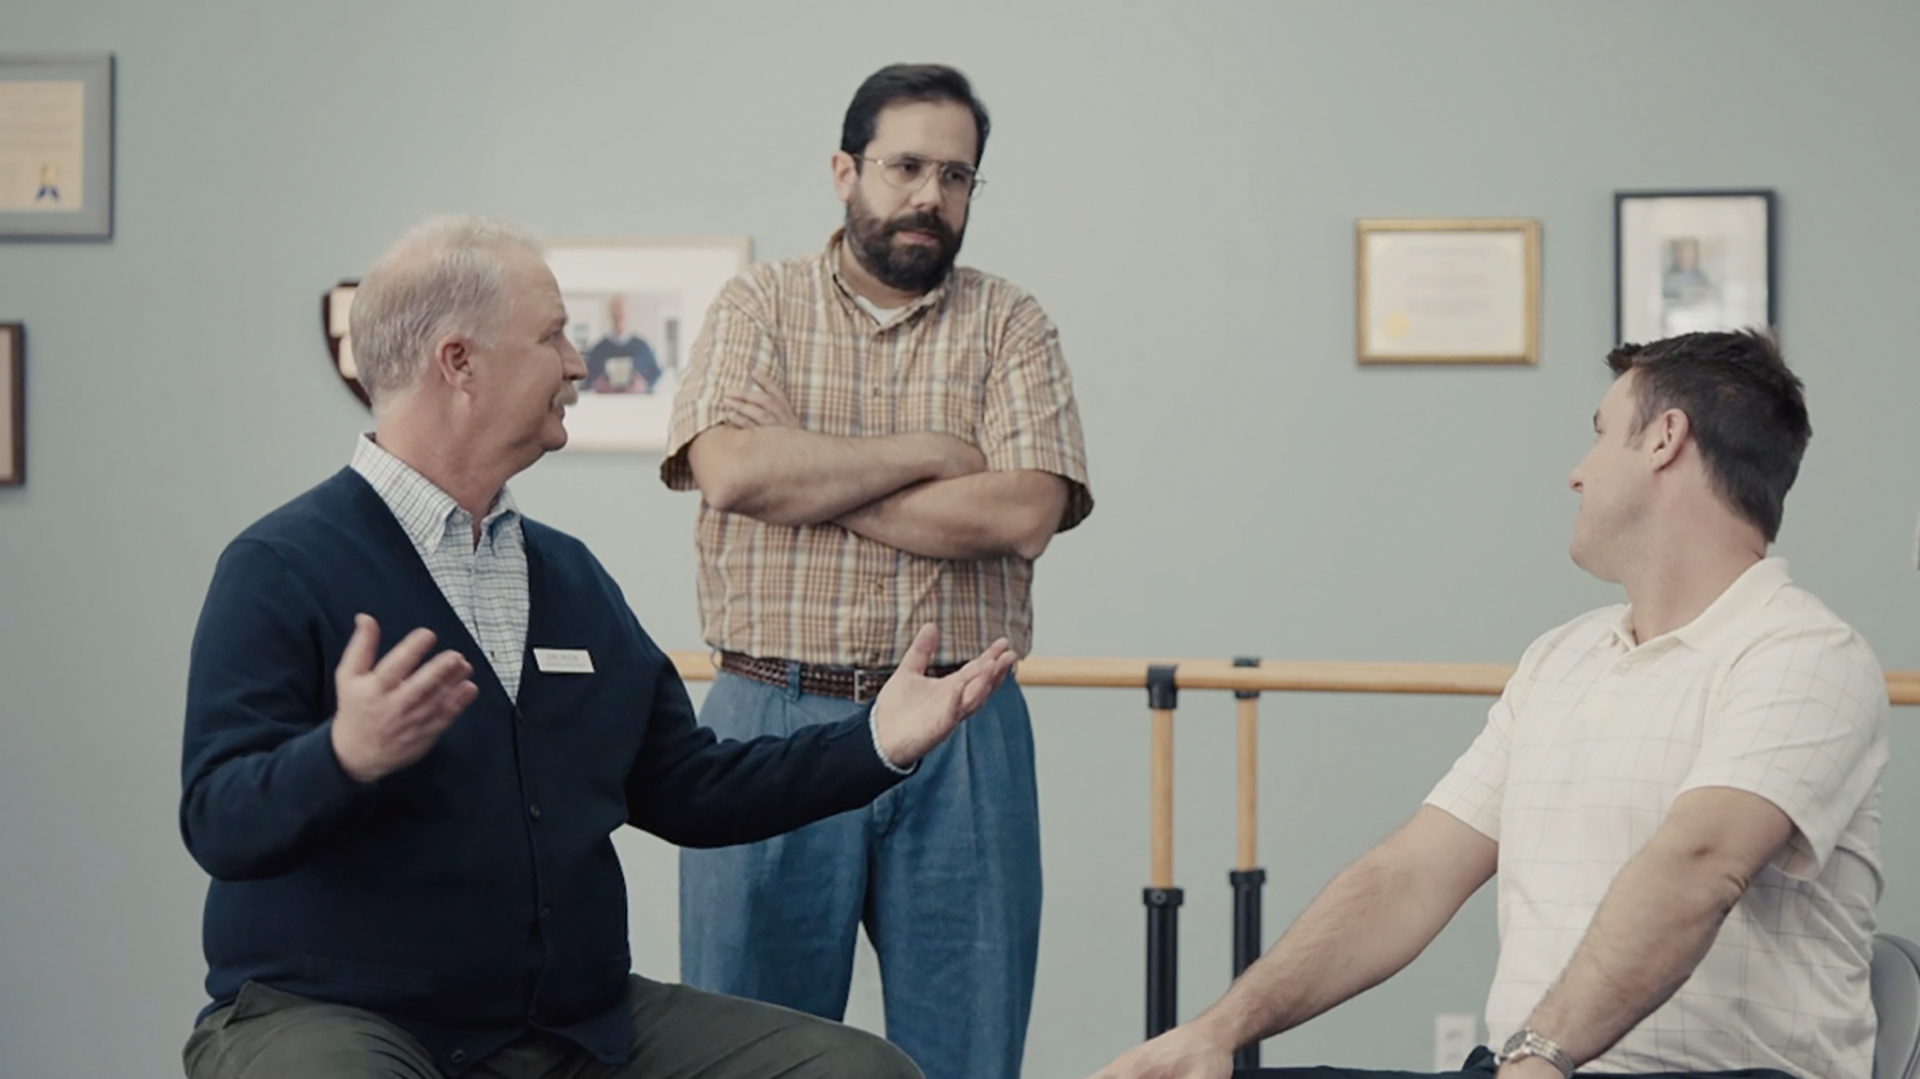 Arnold Worldwide explains the Progressive ‘Don’t be like your parents’ ads